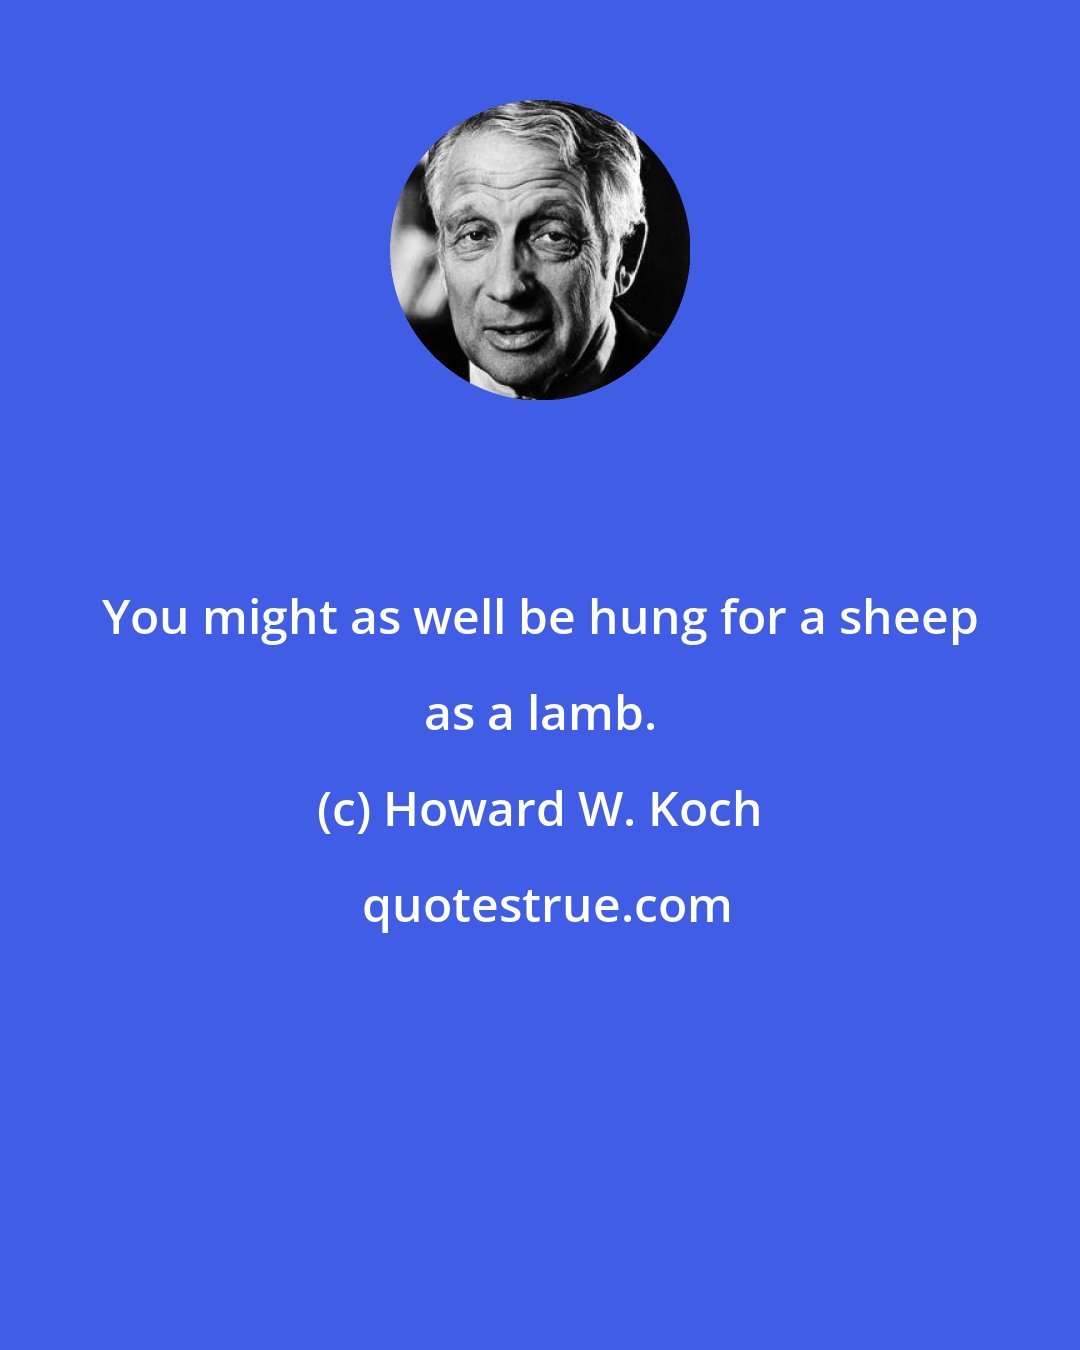 Howard W. Koch: You might as well be hung for a sheep as a lamb.